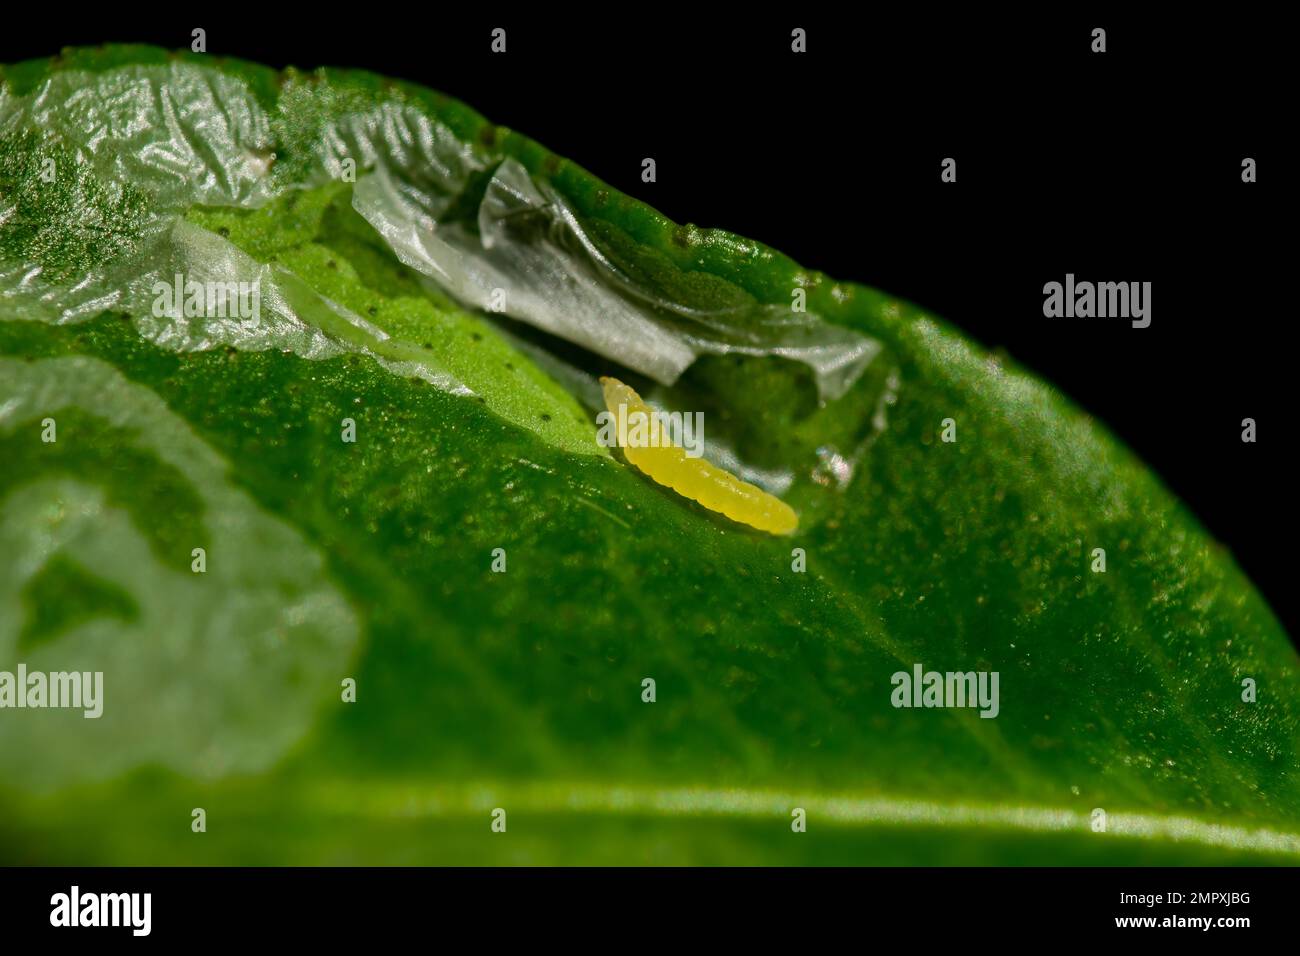 The citrus leaf miner feeding on citrus leaf making shiny silvery serpentine mines. It is important insect pest of citrus causes plant infection. Stock Photo